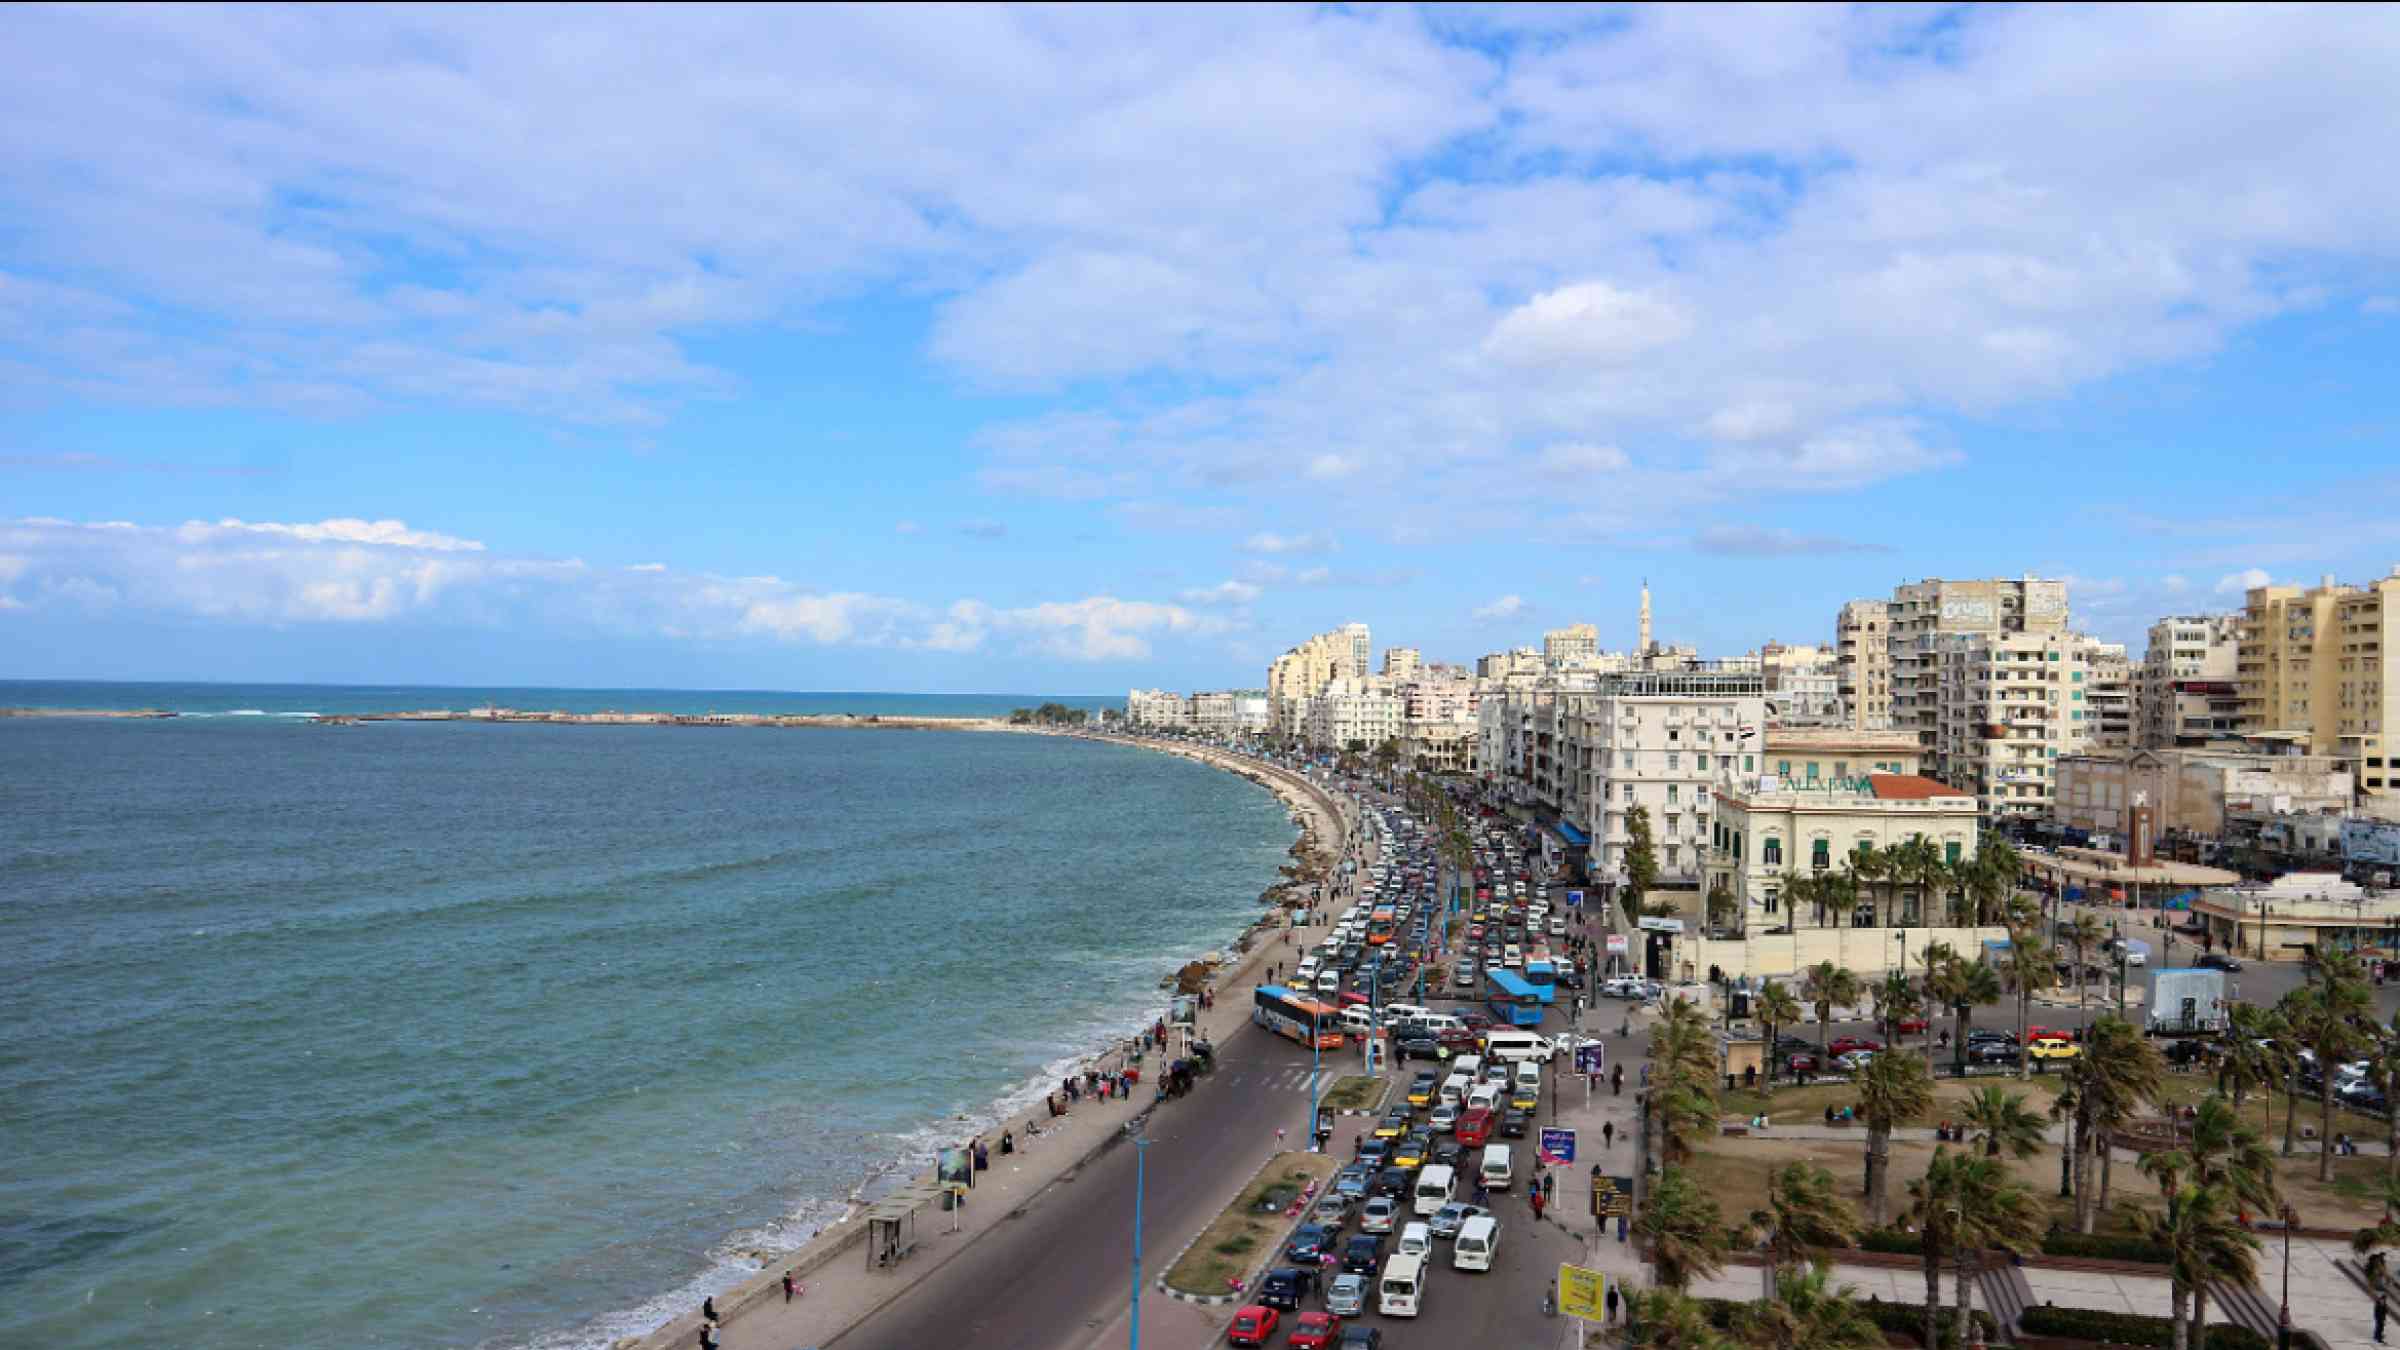 Corniche seaside street and seafront of the city of Alexandria, Egypt